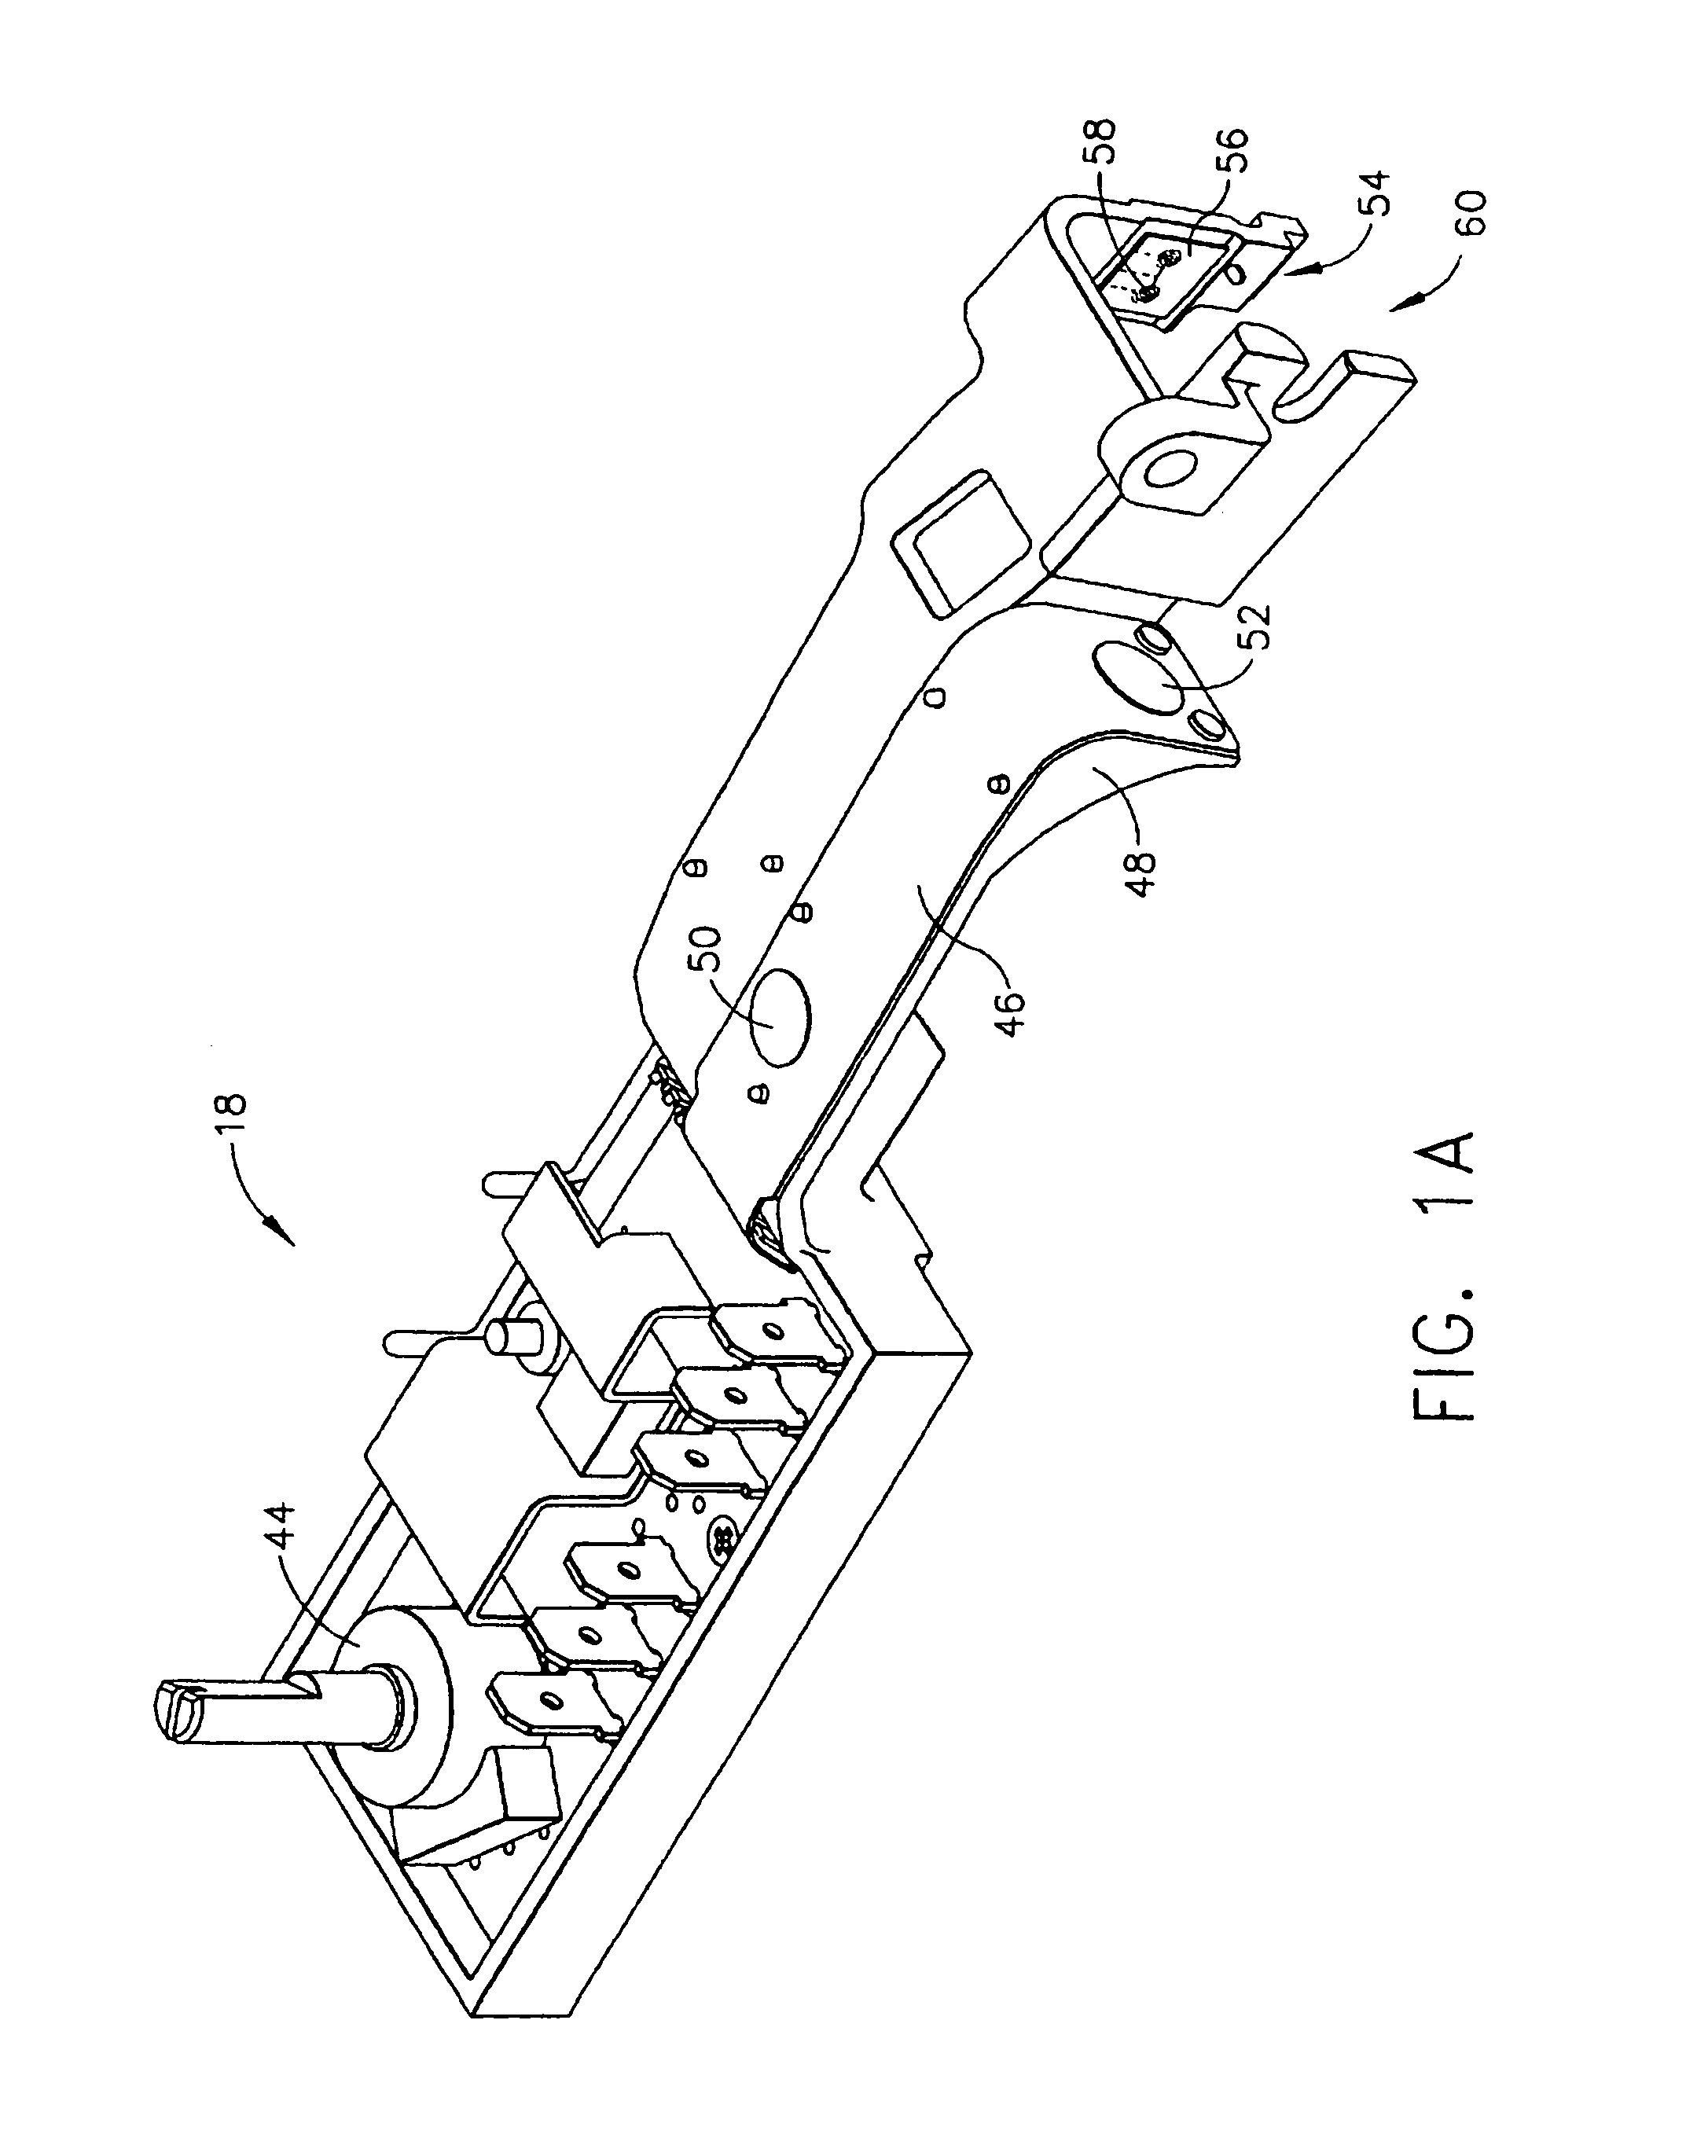 Control module for flywheel operated hand tool